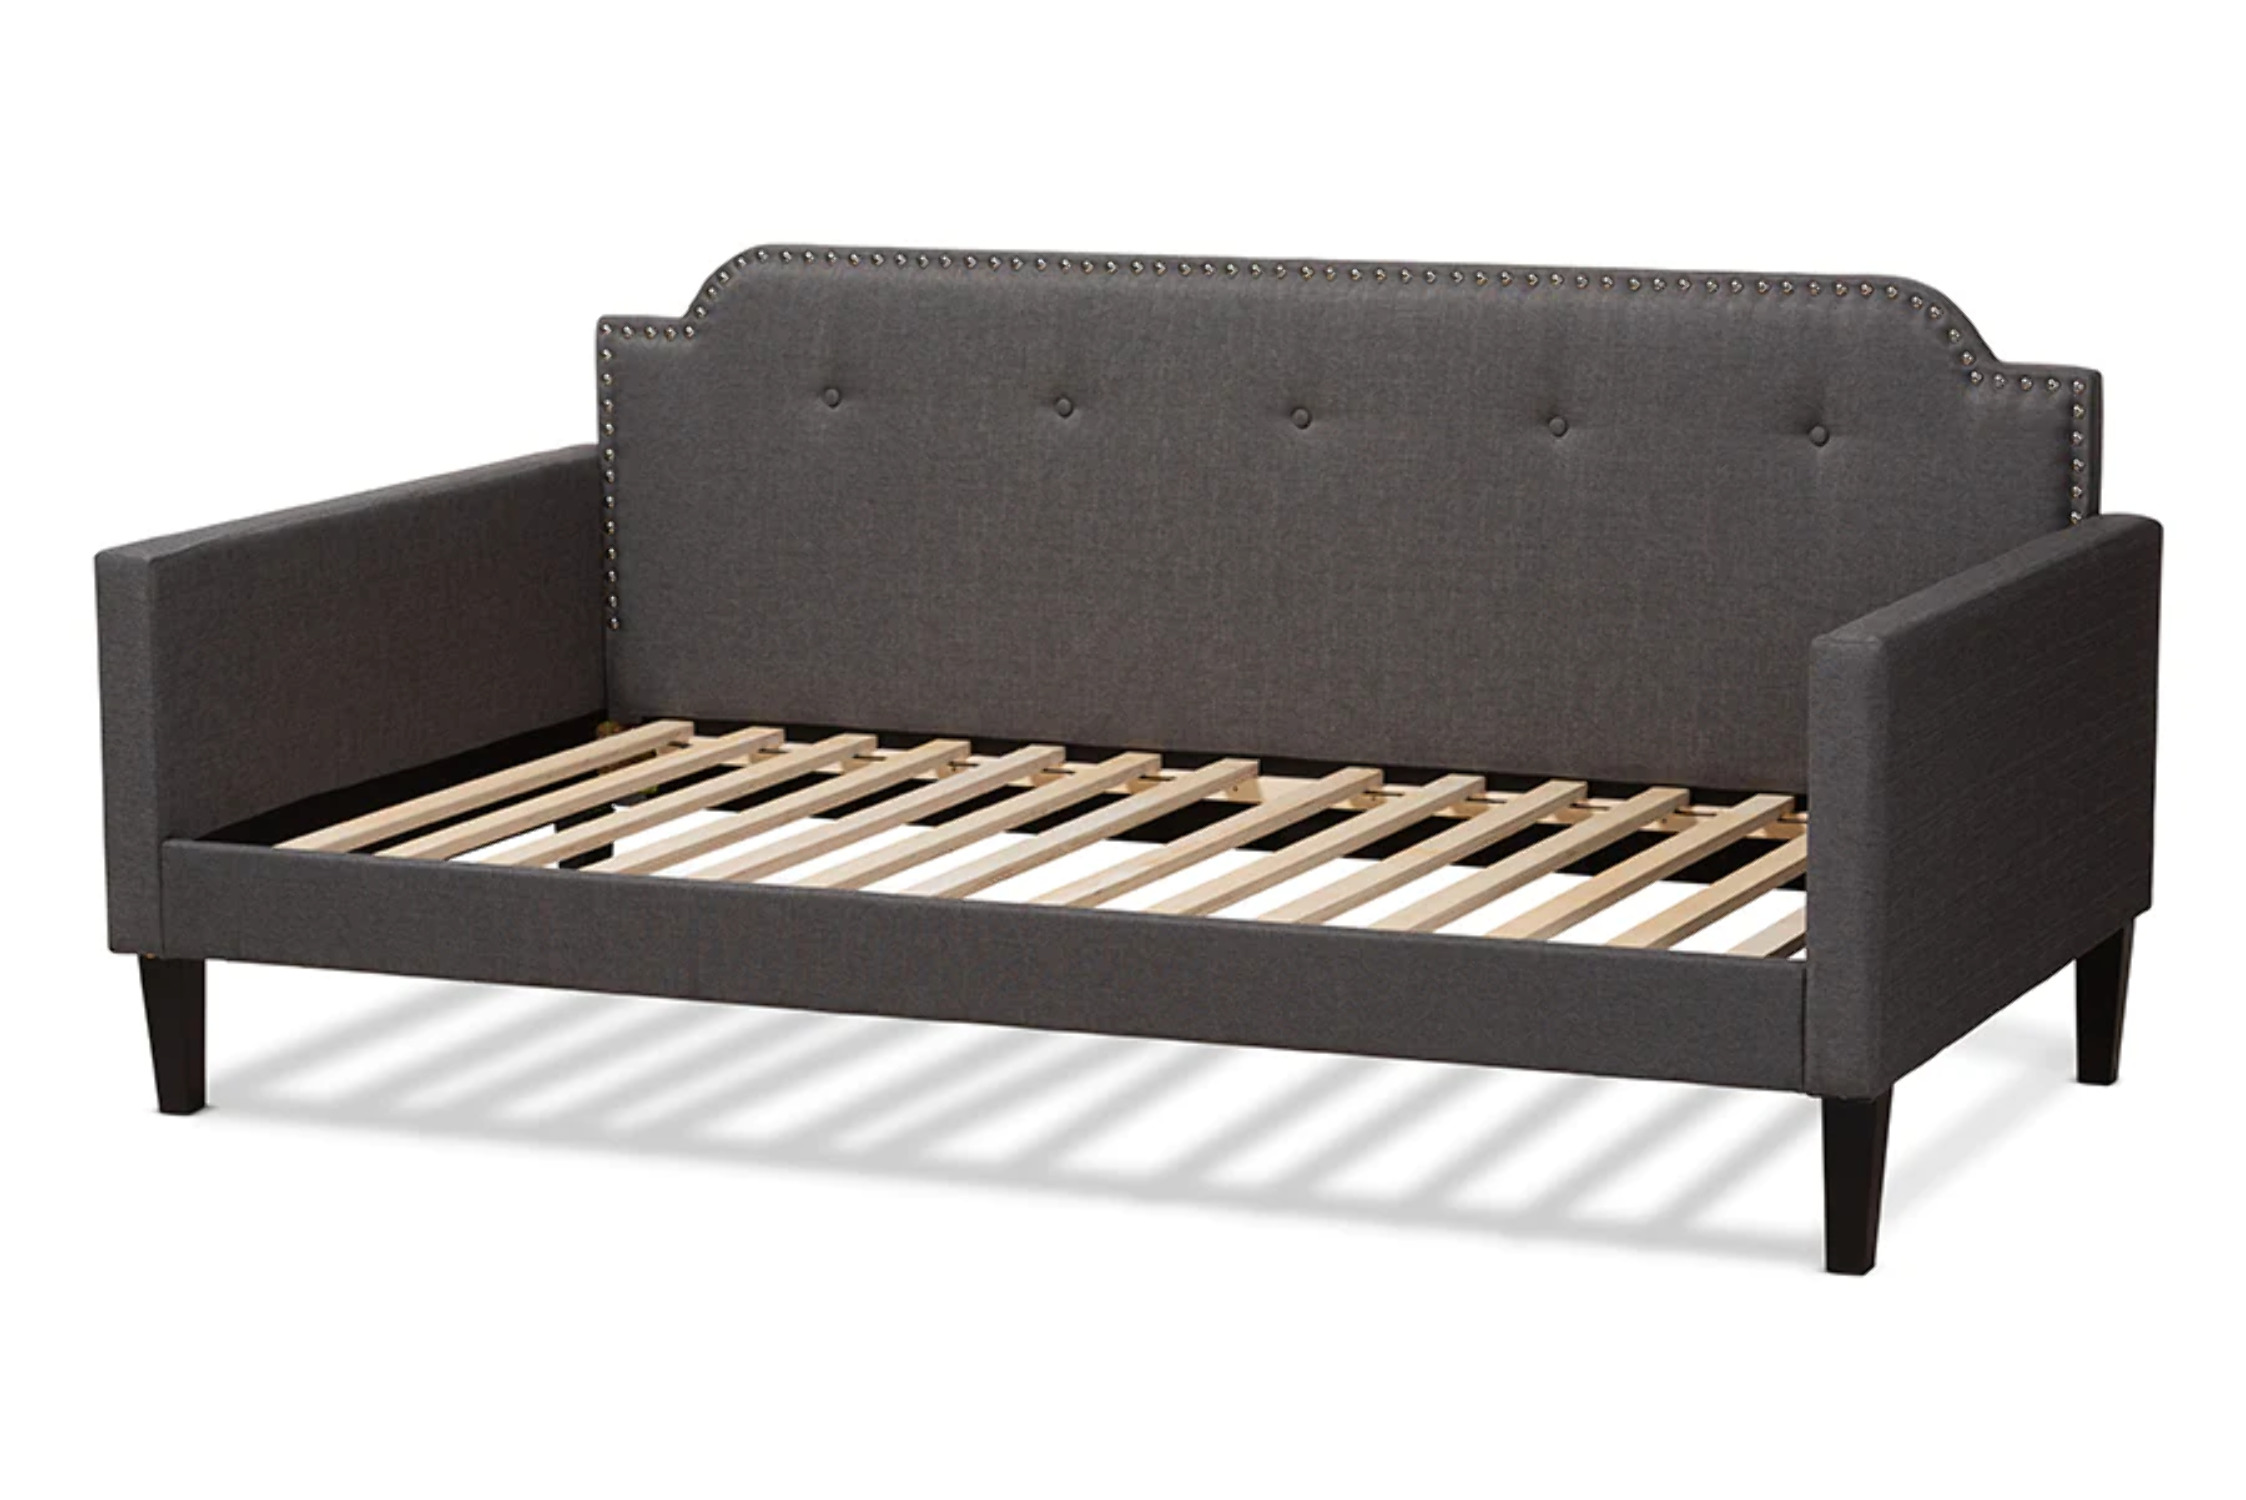 Baxton Studio Packer Modern and Contemporary Grey Fabric Upholstered Twin Size Sofa Daybed - image 4 of 7